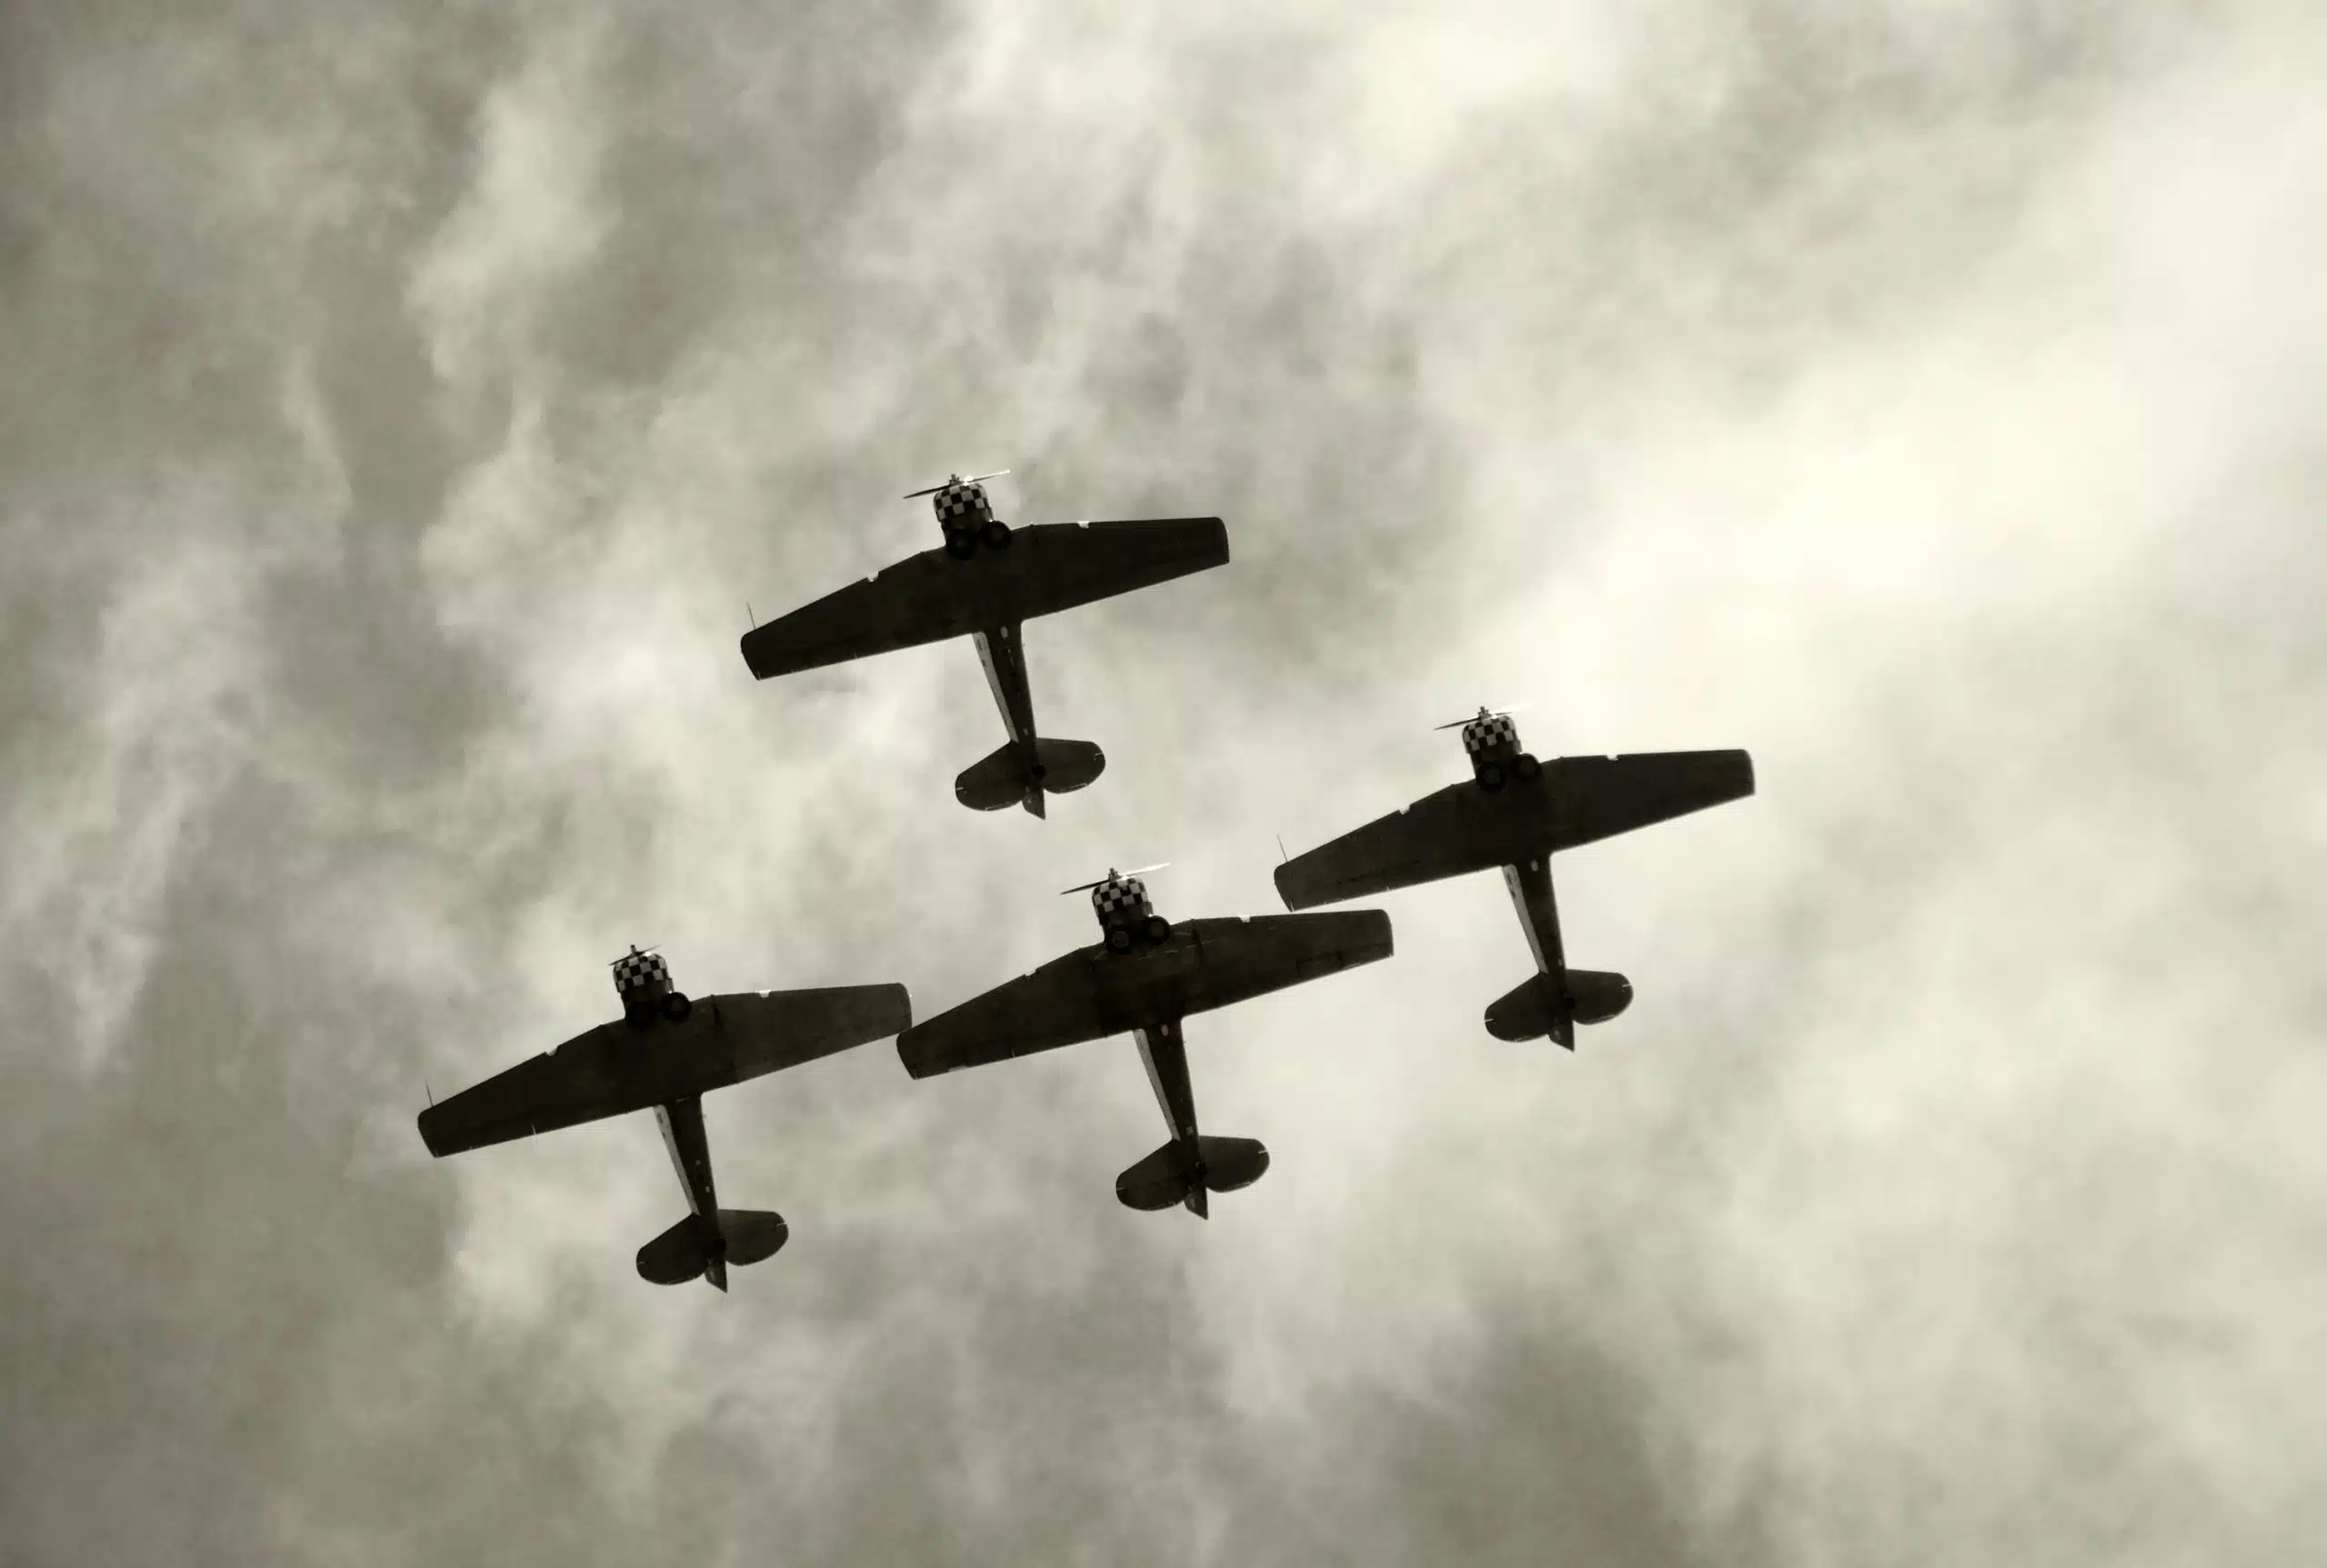 World War airplanes on formation